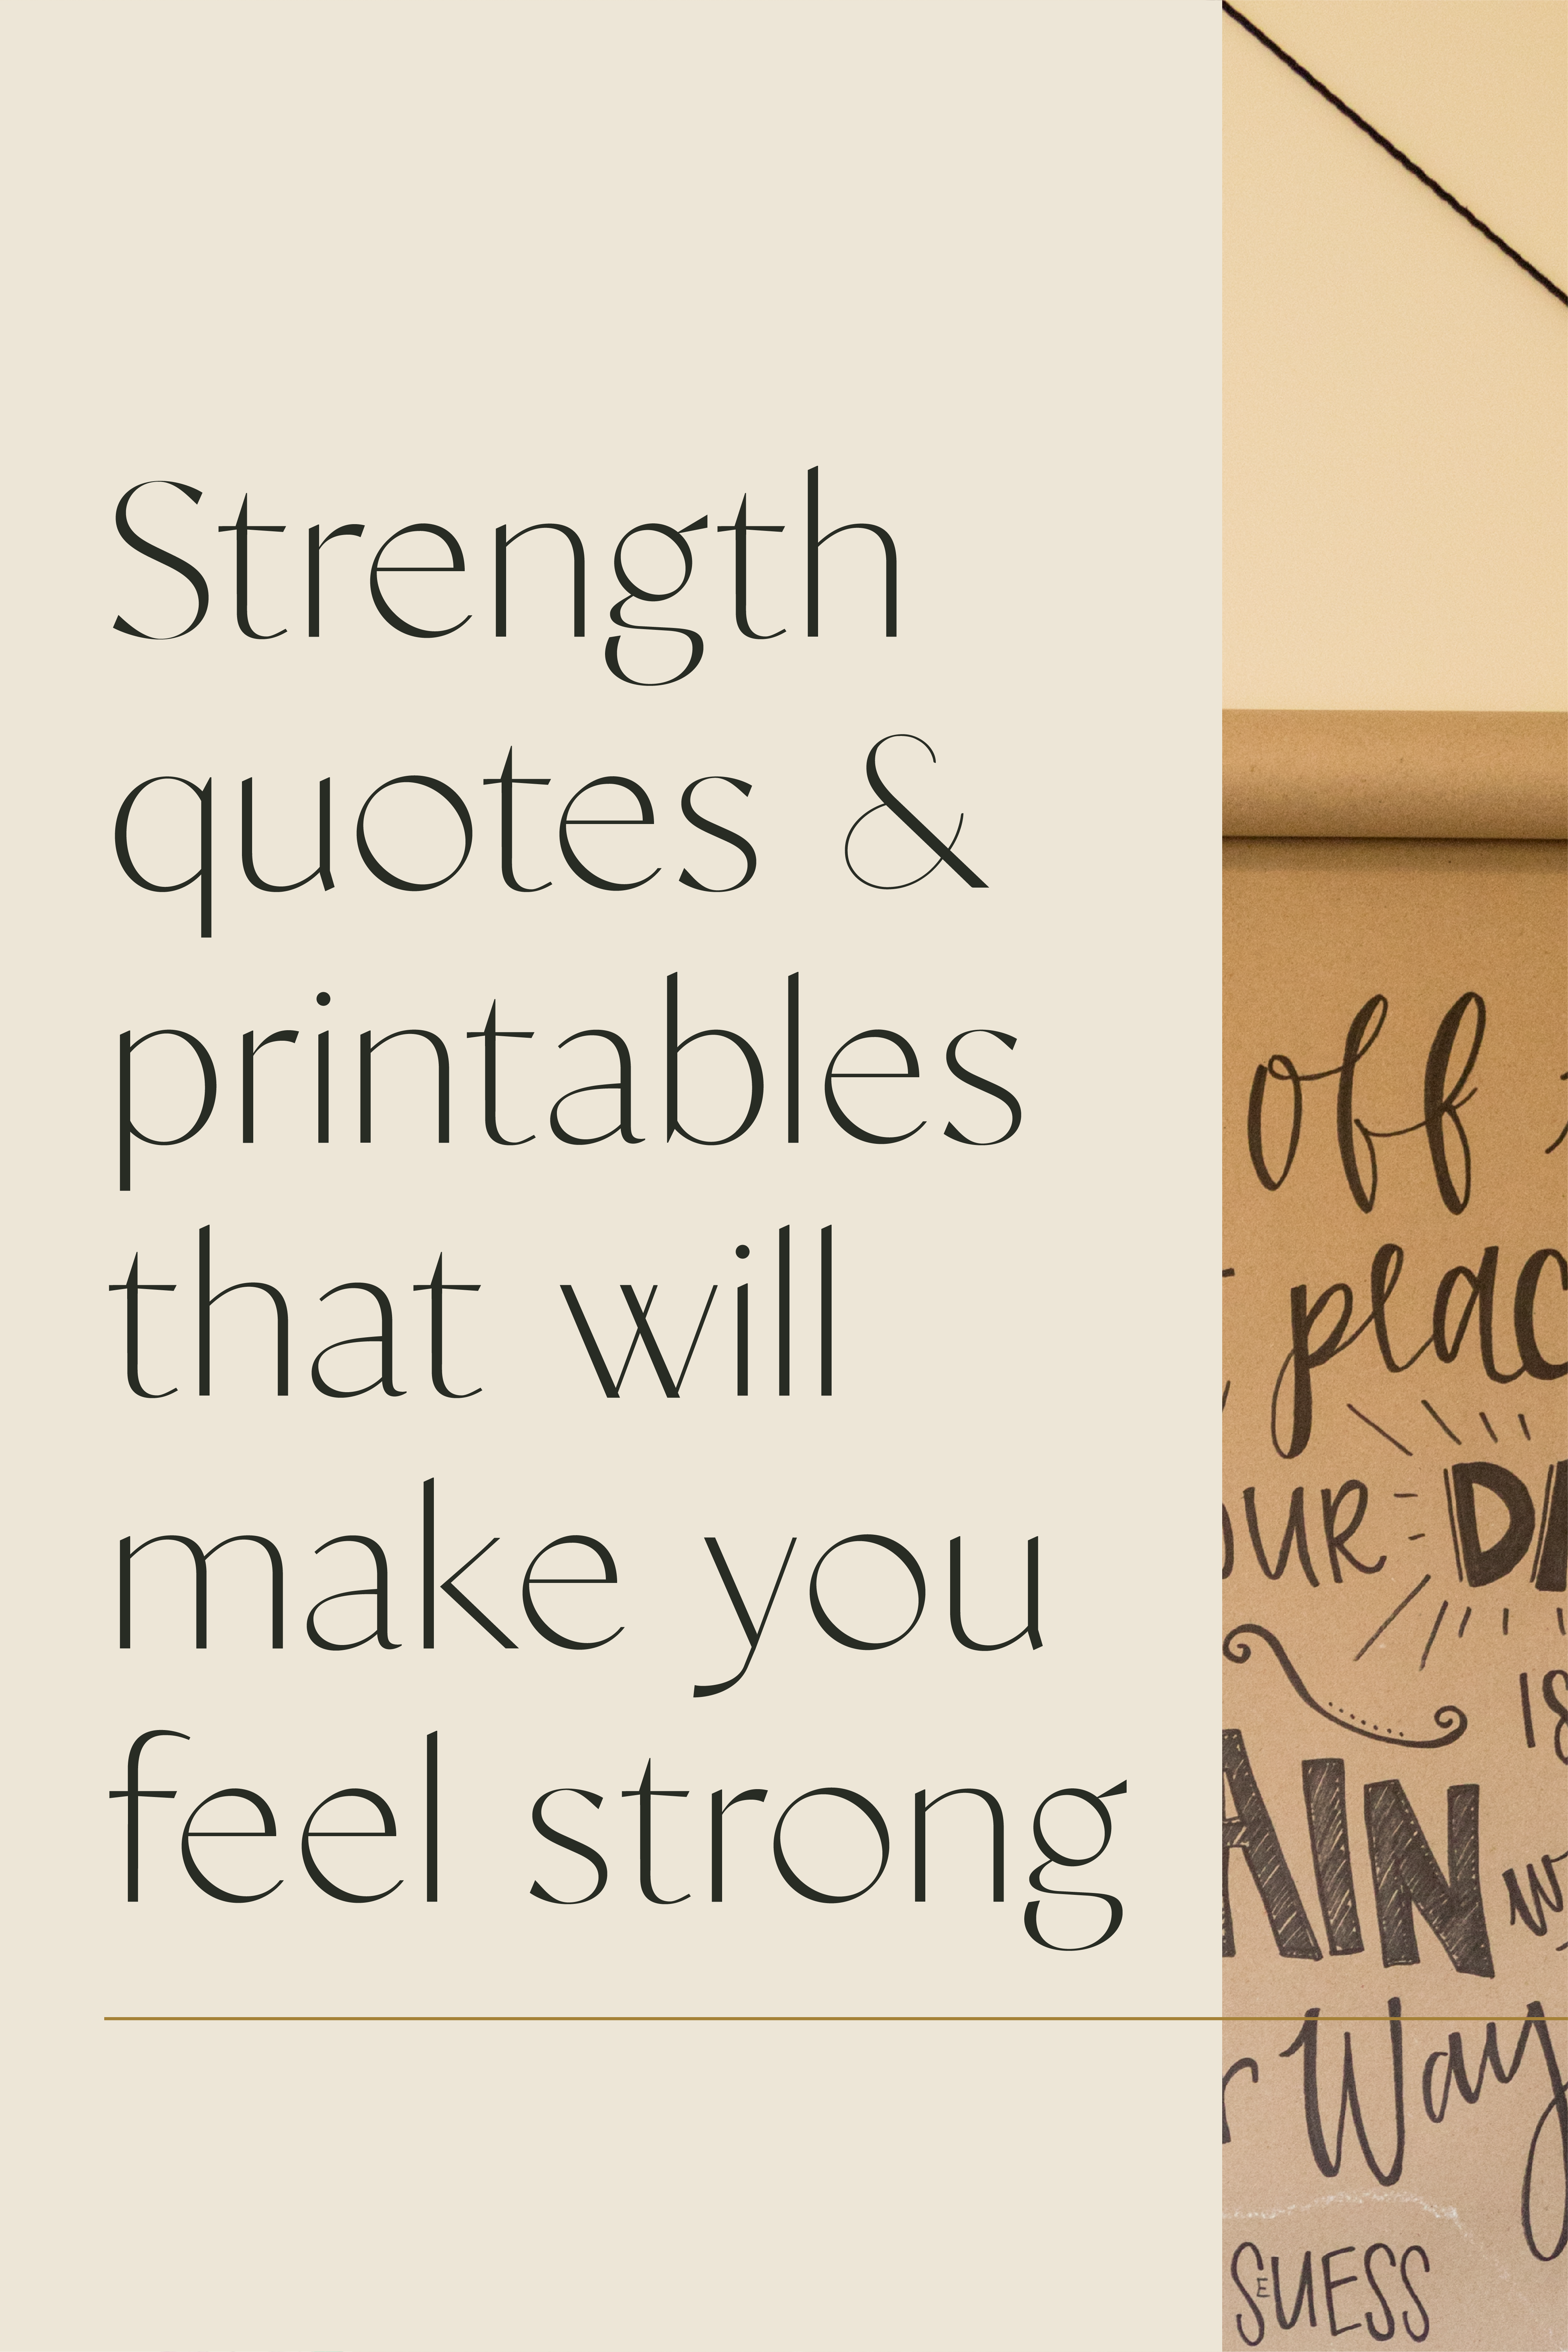 10 Strength Quotes + Printables That Will Make You Feel Strong 9